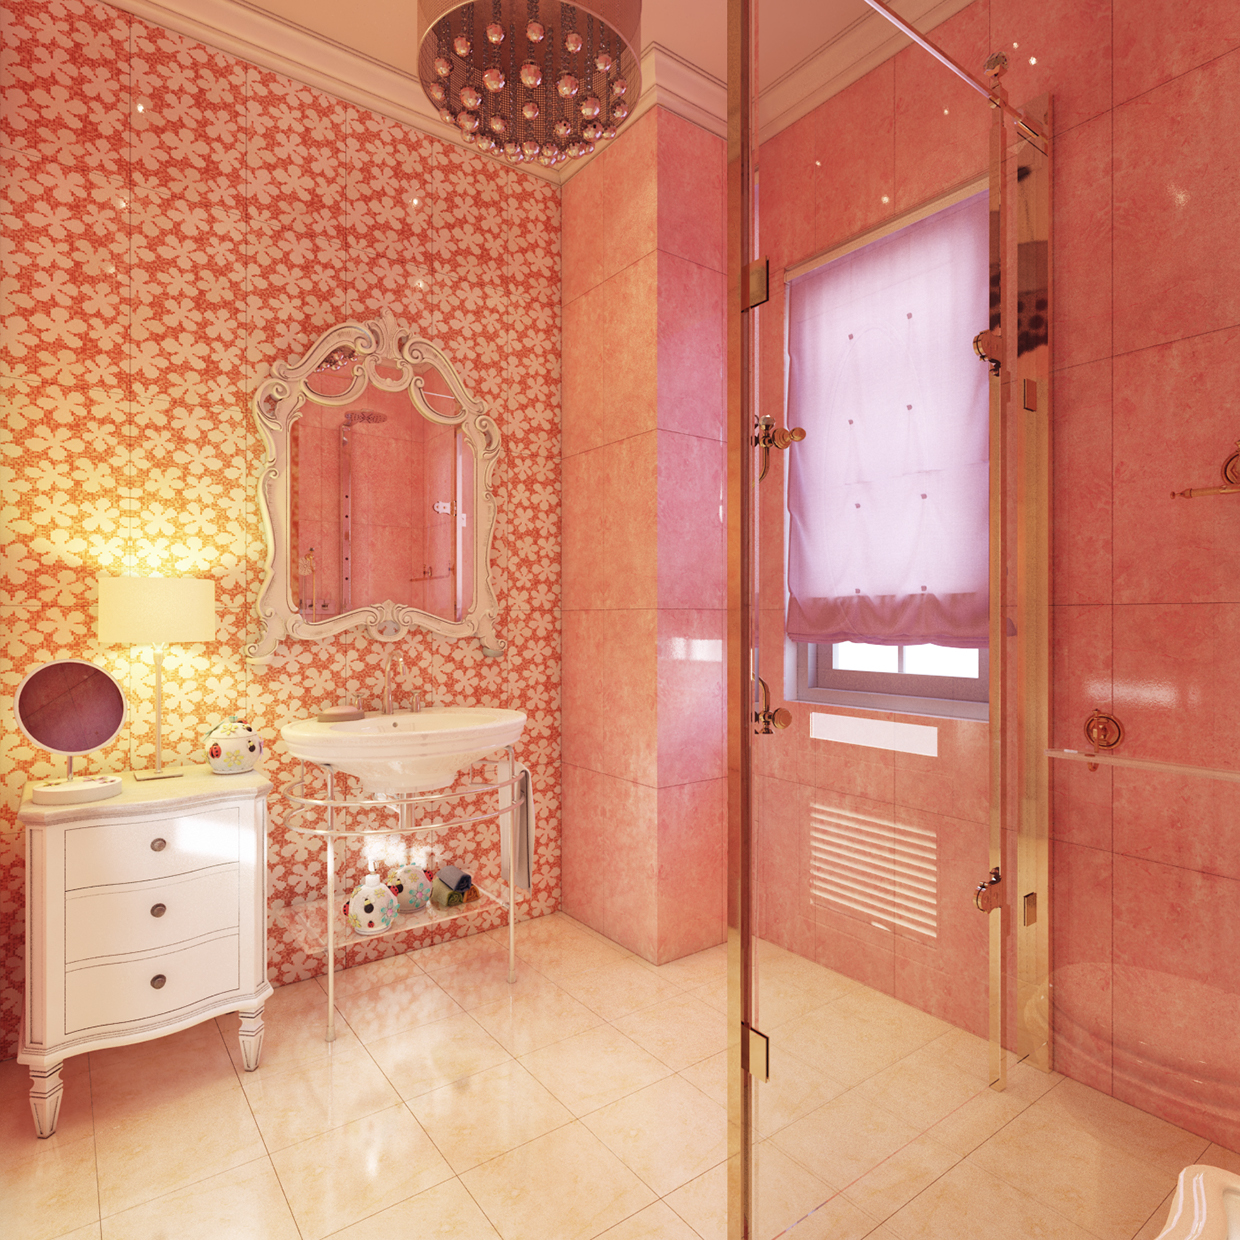 colorful wall for bathroom "width =" 1240 "height =" 1240 "srcset =" https://mileray.com/wp-content/uploads/2020/05/1588515922_709_30-Bathroom-Design-Ideas-Complete-With-Arranging-The-Small-Space.jpg 1240w, https: // myfashionos .com / wp-content / uploads / 2016/08 / Koj-Design3-2-150x150.jpg 150w, https://mileray.com/wp-content/uploads/2016/08/Koj-Design3-2-300x300. jpg 300w, https://mileray.com/wp-content/uploads/2016/08/Koj-Design3-2-768x768.jpg 768w, https://mileray.com/wp-content/uploads/2016/08 / Koj-Design3-2-1024x1024.jpg 1024w, https://mileray.com/wp-content/uploads/2016/08/Koj-Design3-2-696x696.jpg 696w, https://mileray.com/wp - content / uploads / 2016/08 / Koj-Design3-2-1068x1068.jpg 1068w, https://mileray.com/wp-content/uploads/2016/08/Koj-Design3-2-420x420.jpg 420w "sizes = "(maximum width: 1240px) 100vw, 1240px